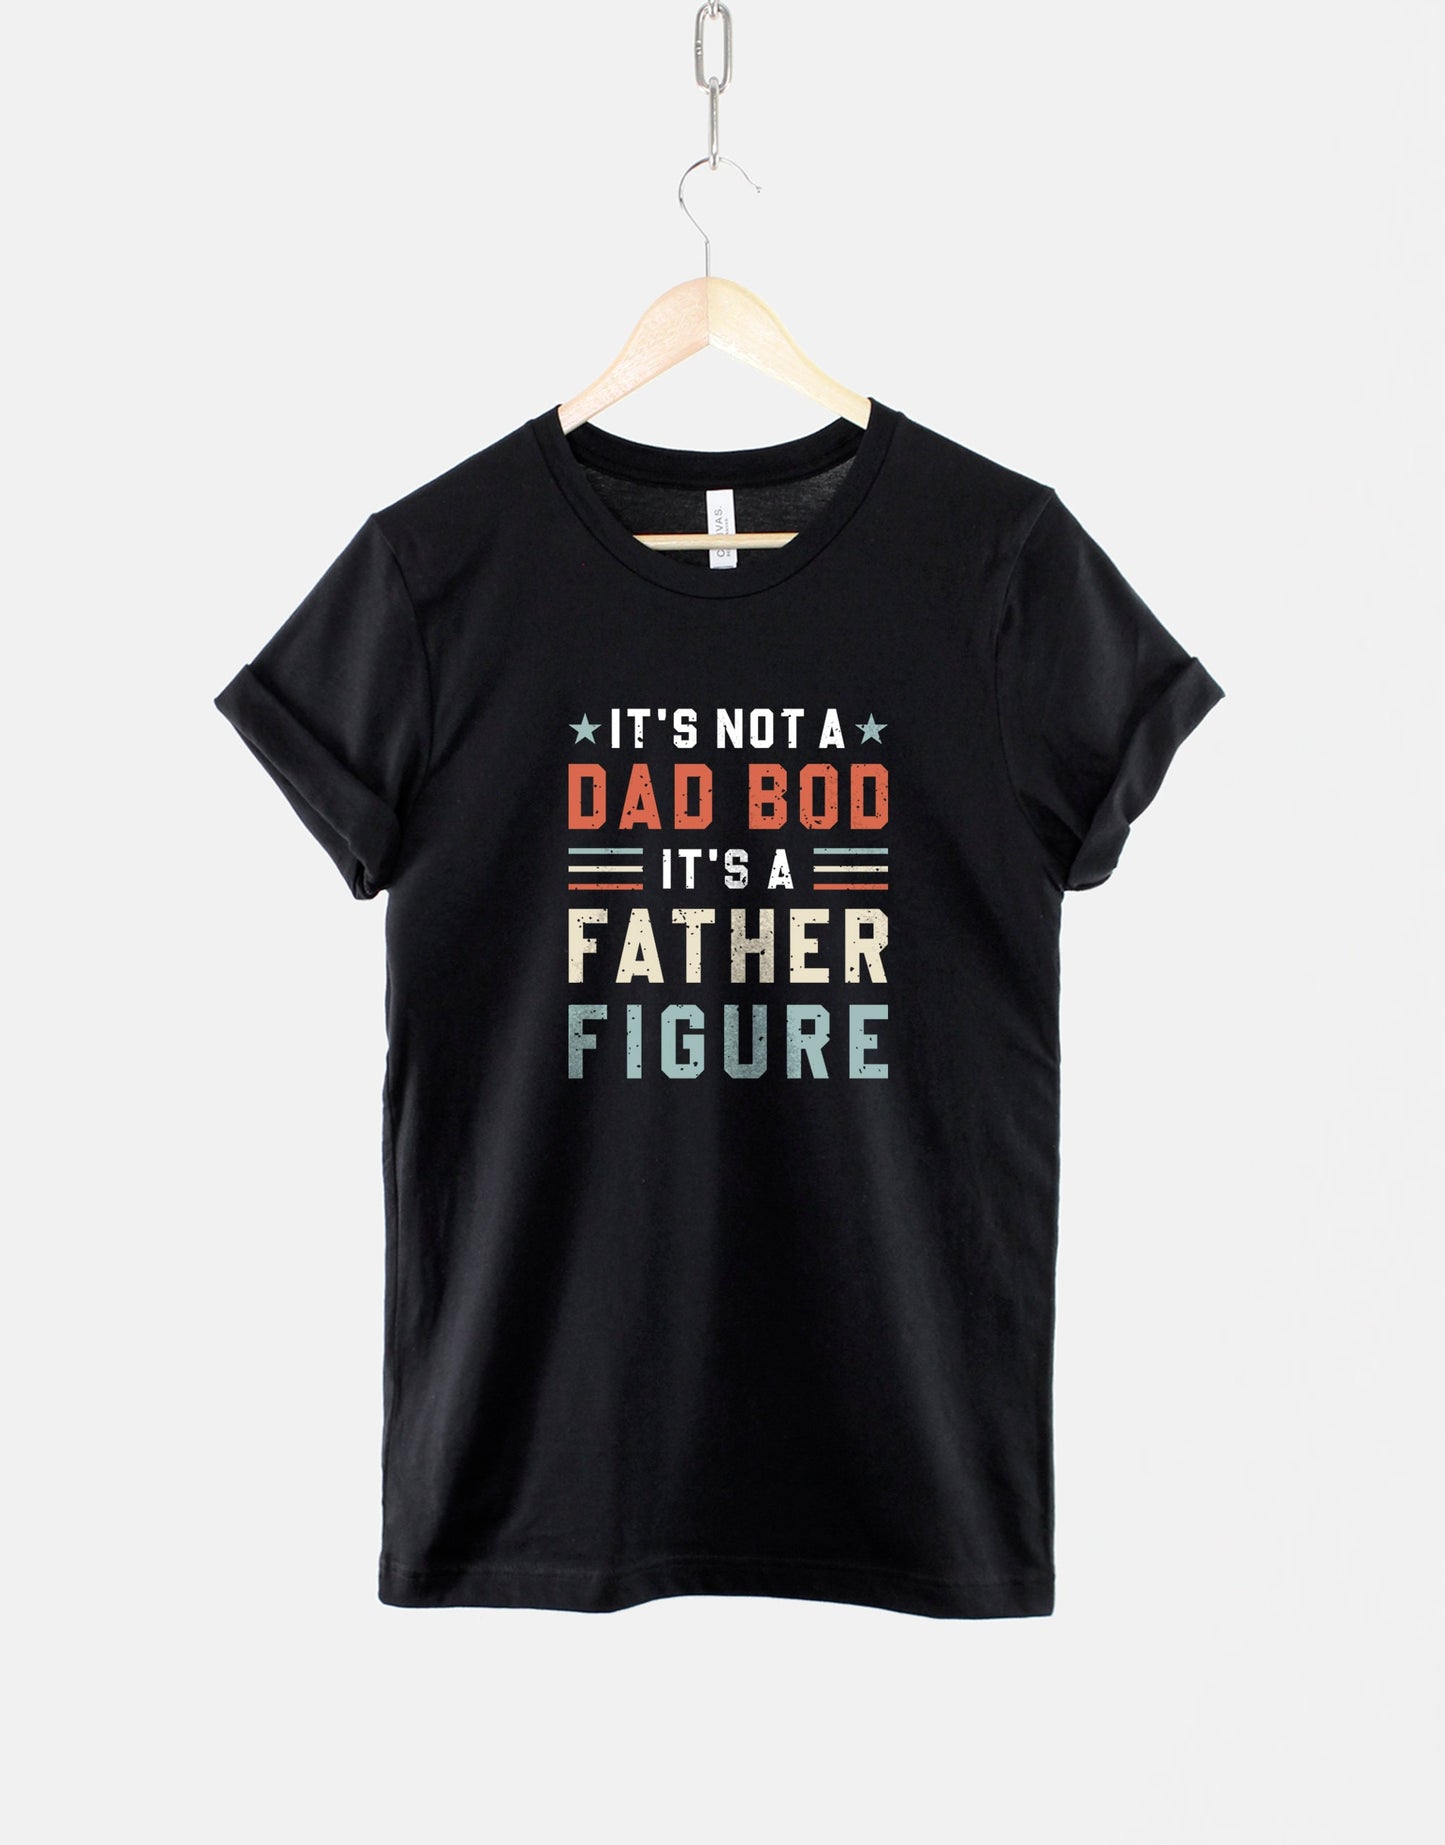 It's Not A Dad Bod It's A Father Figure T-Shirt - Dad Bod T-Shirt - T-Shirt For Dad - Dad T-Shirts